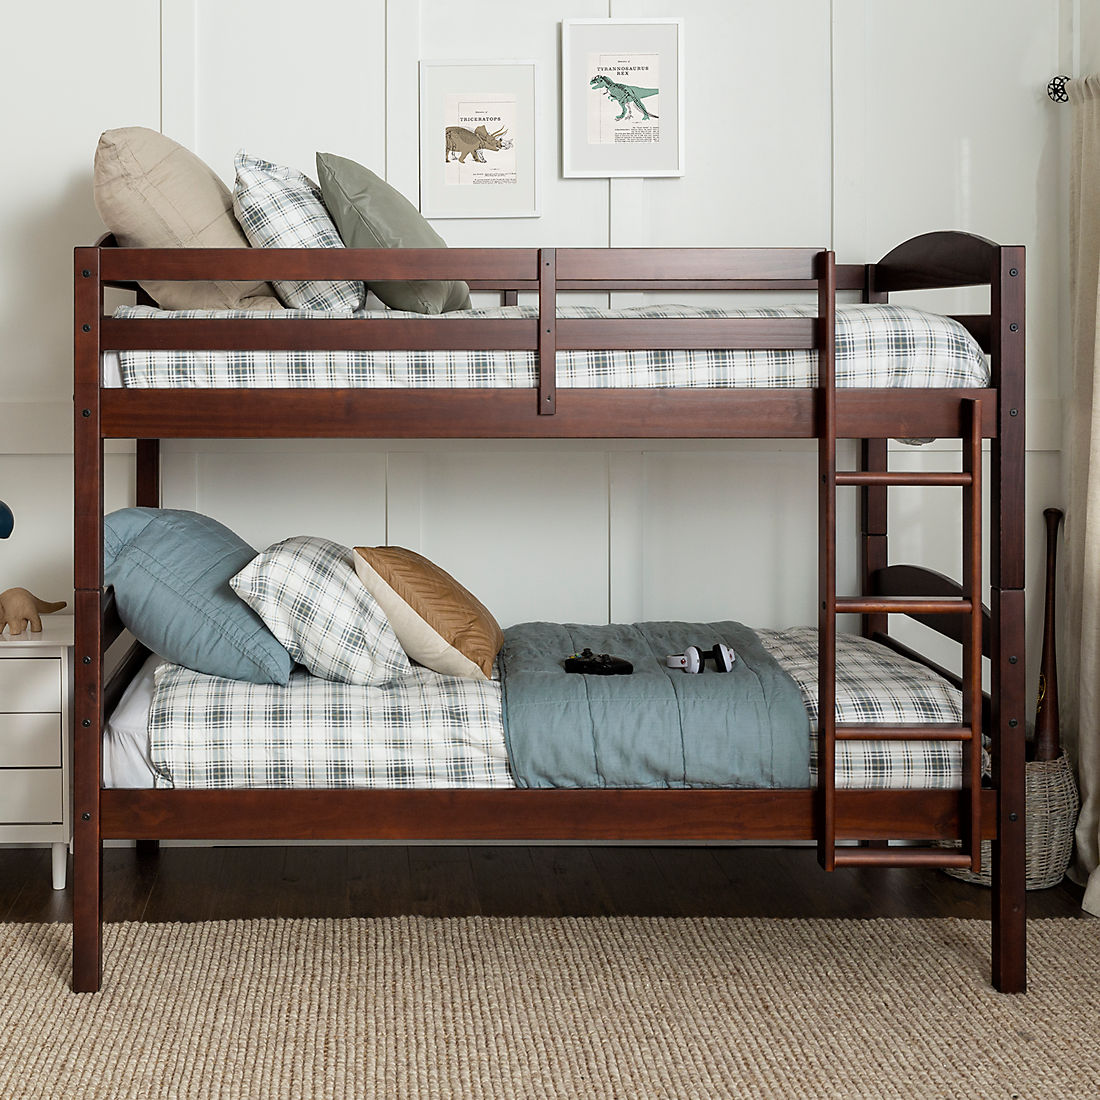 W Trends Twin Size Solid Wood Bunk Bed, Bjs Bunk Bed With Trundle